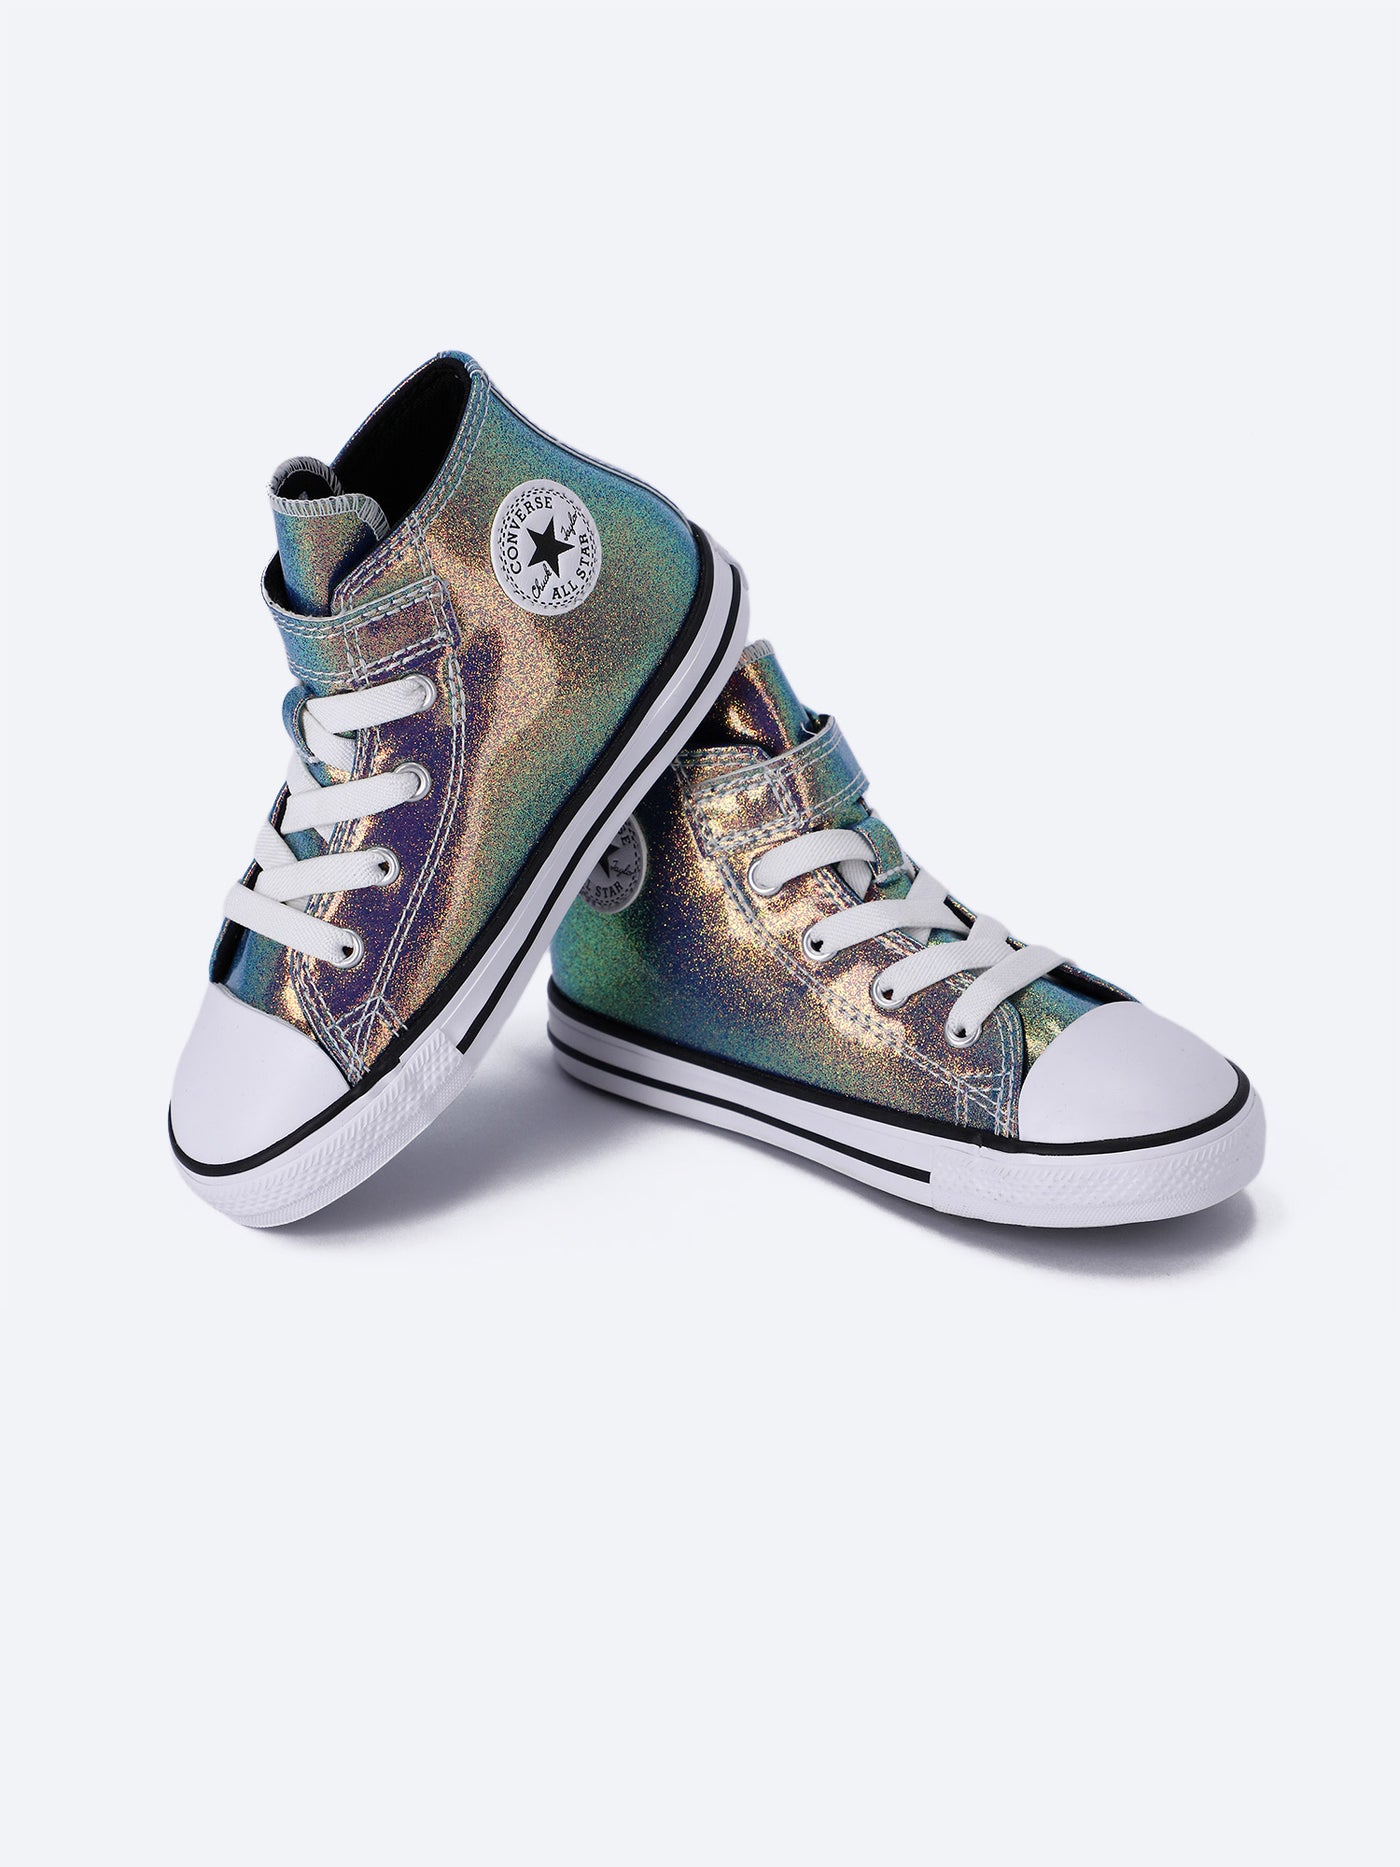 Converse Infants Girls Iridescent Glitter Easy-On Chuck Taylor All Star Sneaker Shoes